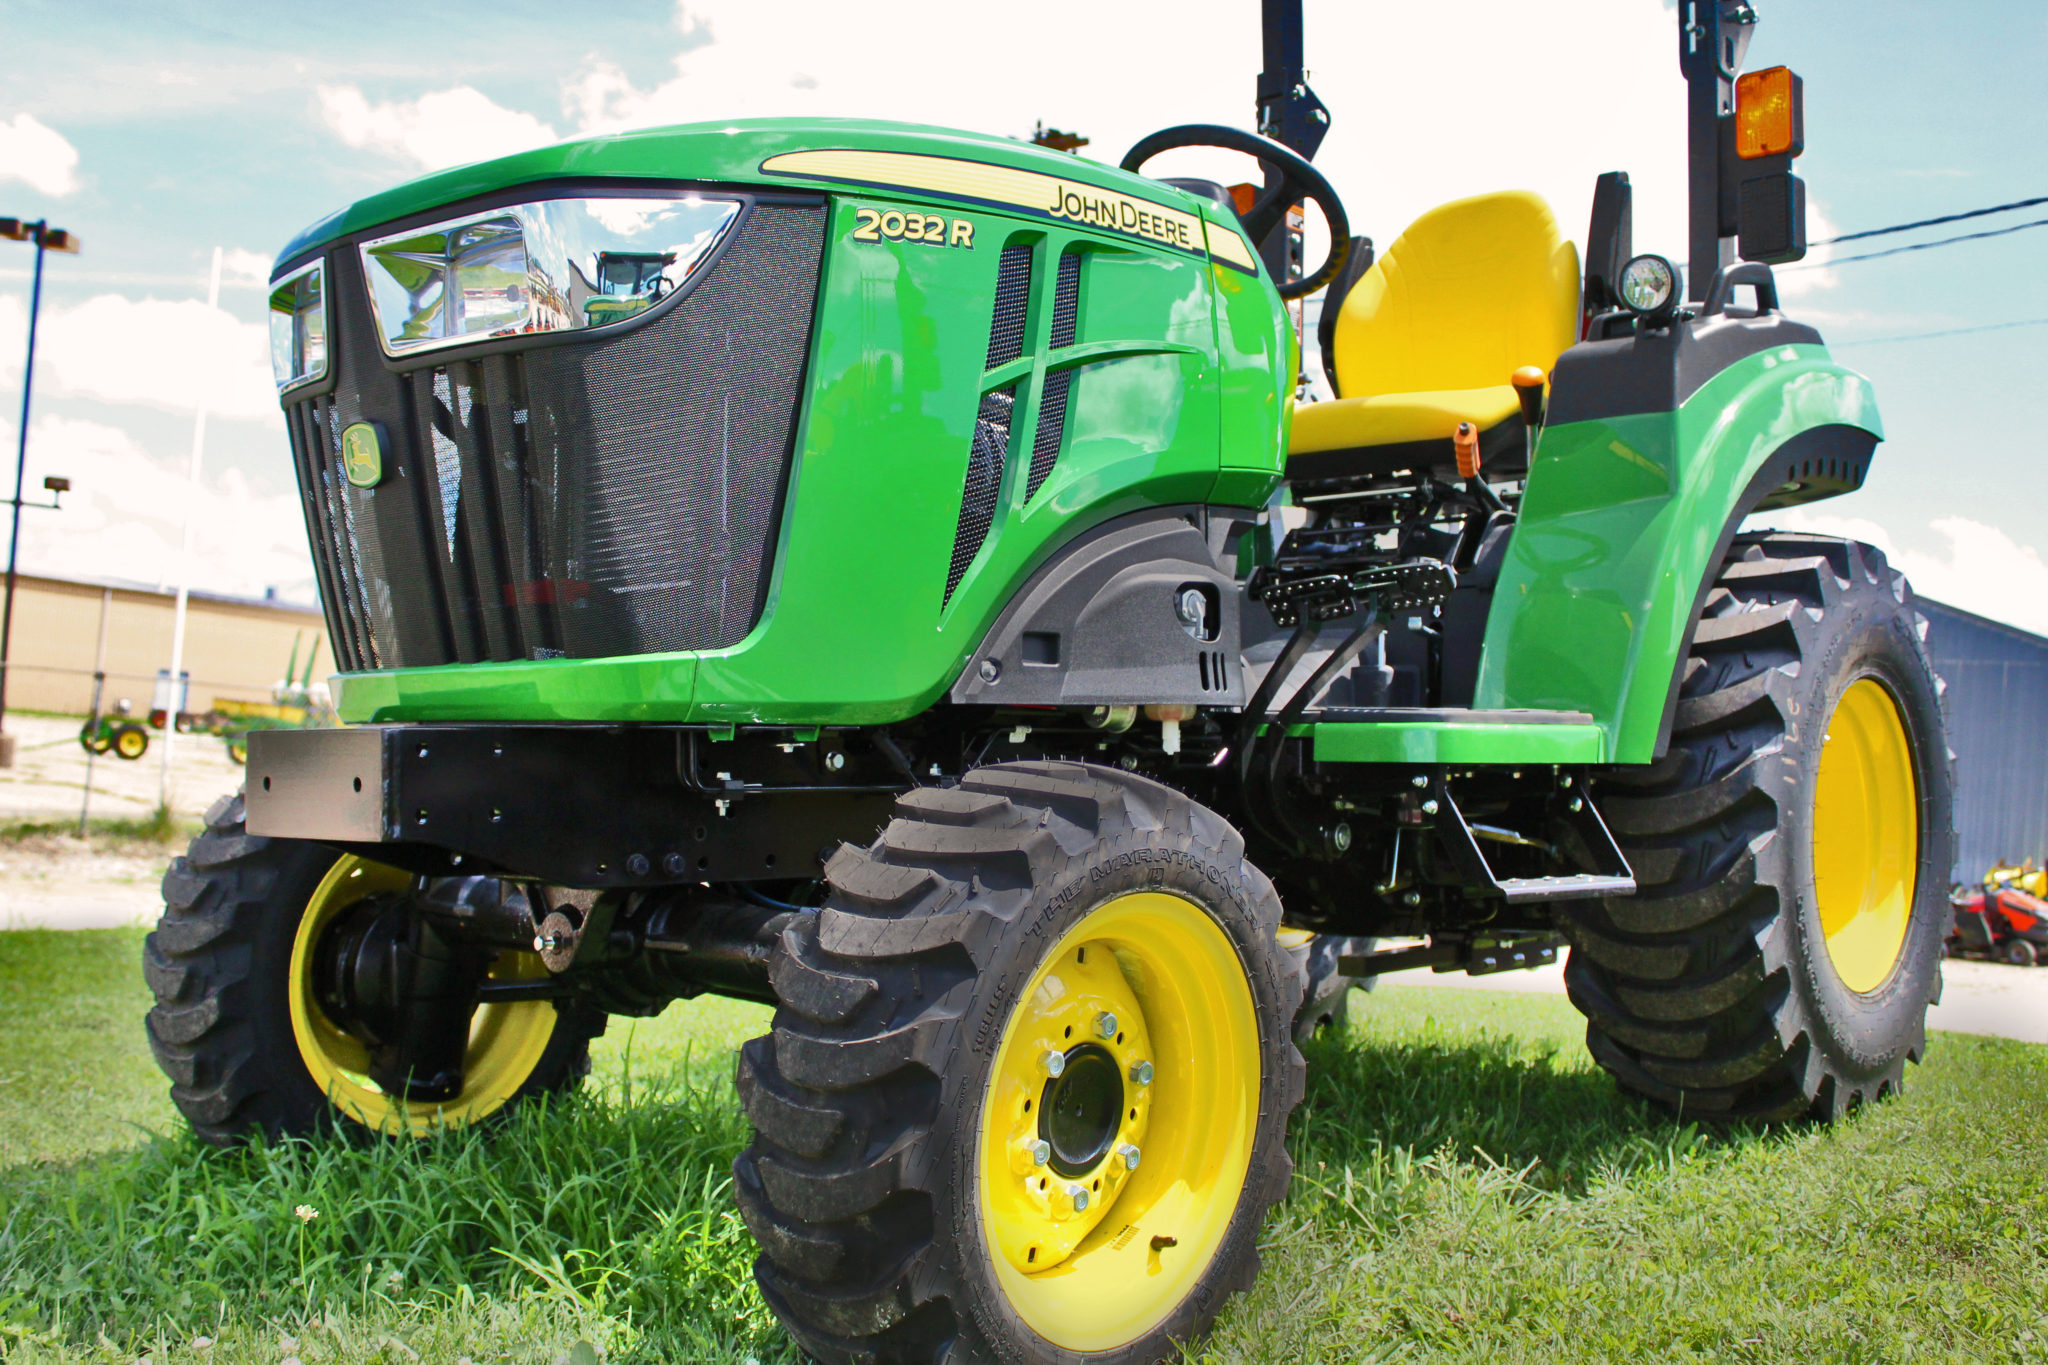 2020 John Deere 2032r Compact Utility Tractor The Company